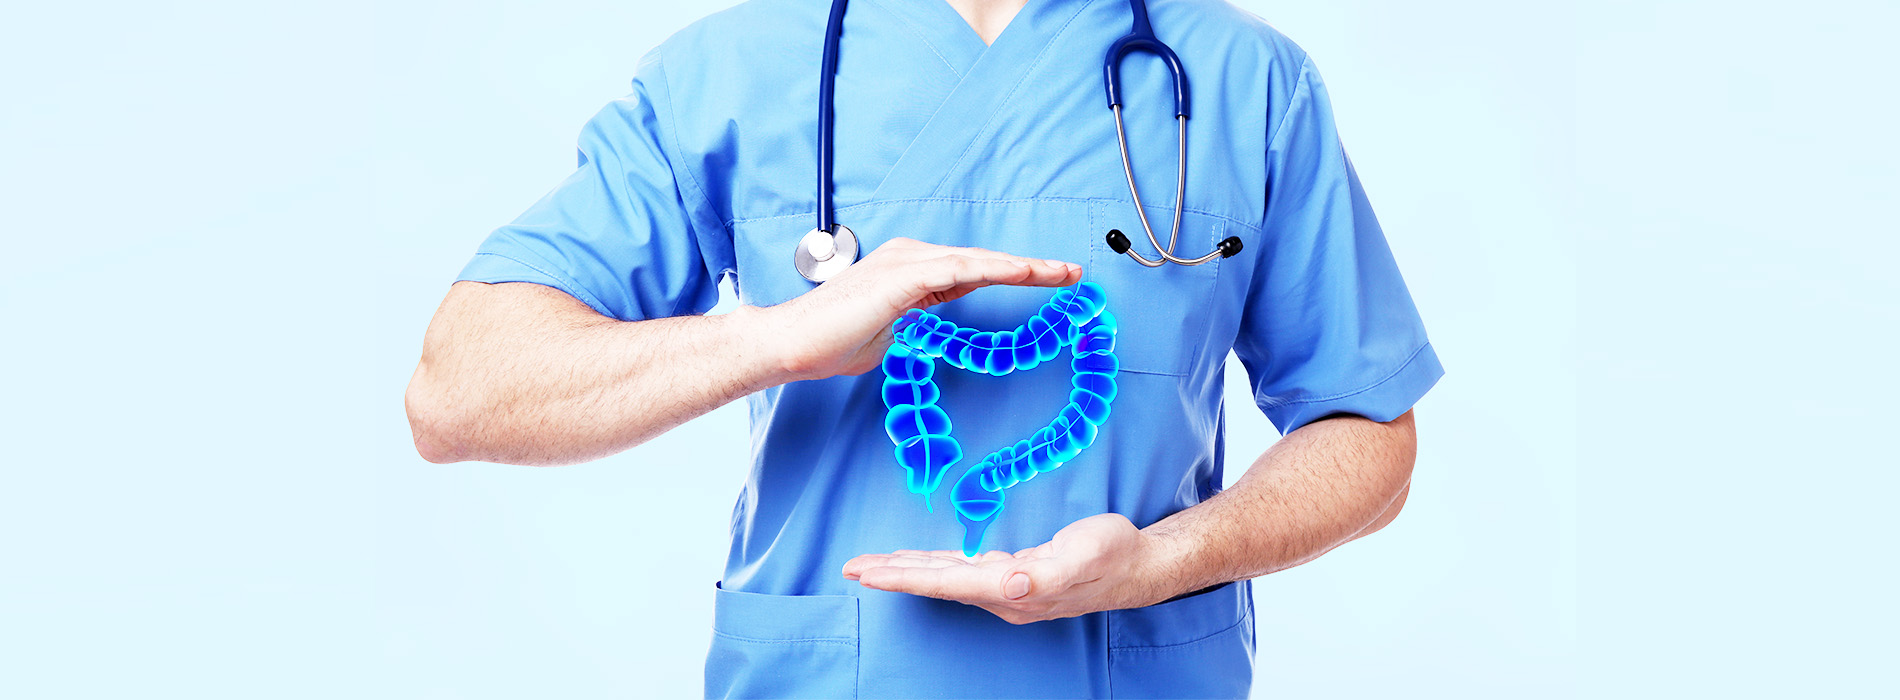 Five Towns Gastroenterology | Gastroenterology Consultation, Medication Infusion and Colonoscopy